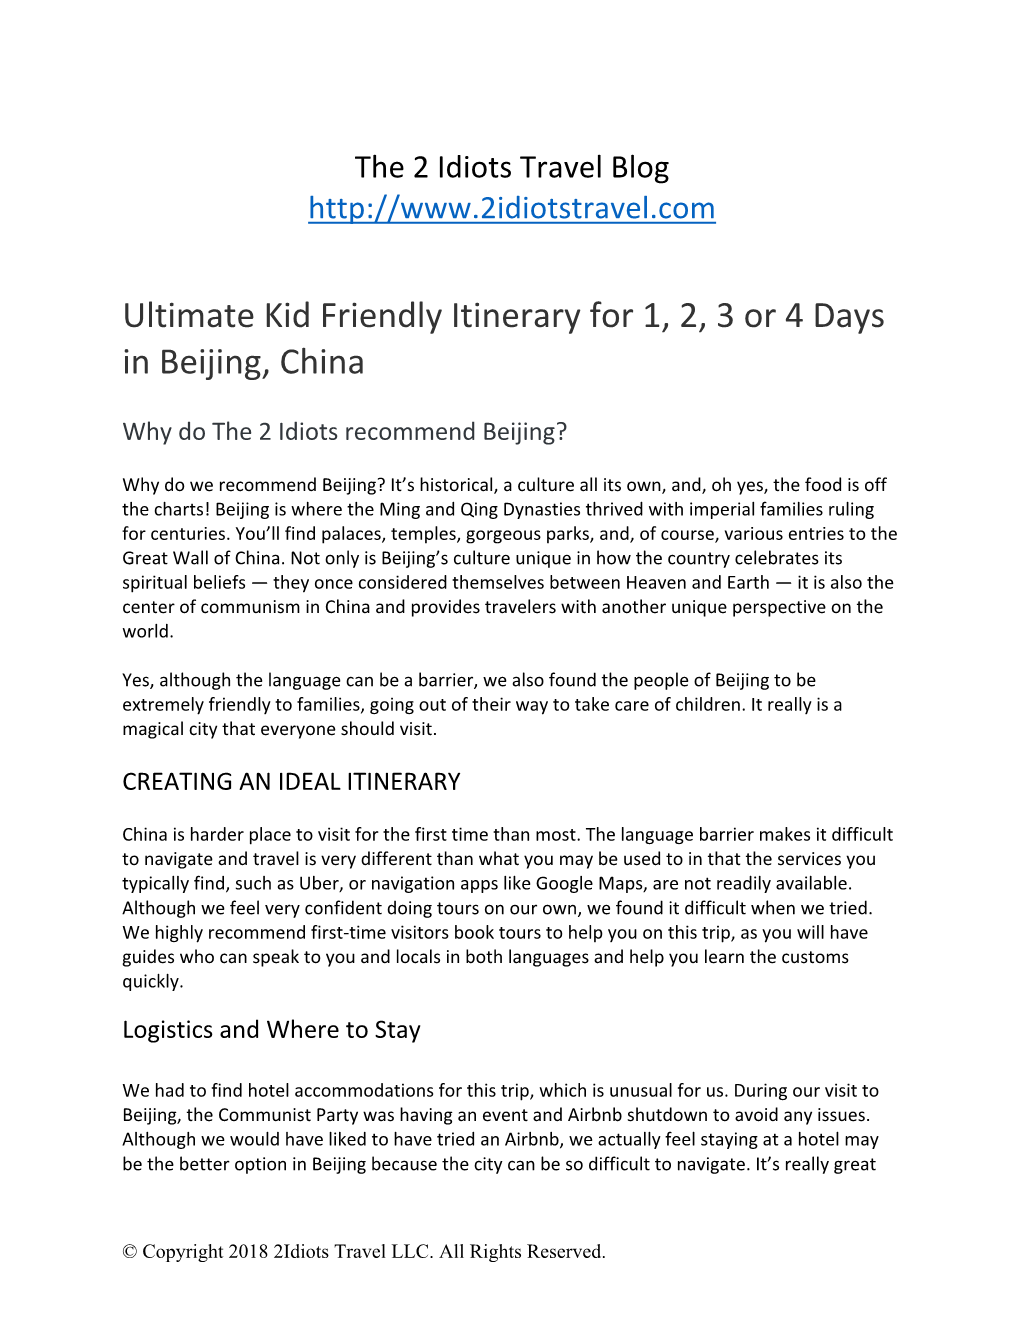 Ultimate Kid Friendly Itinerary for 1, 2, 3 Or 4 Days in Beijing, China